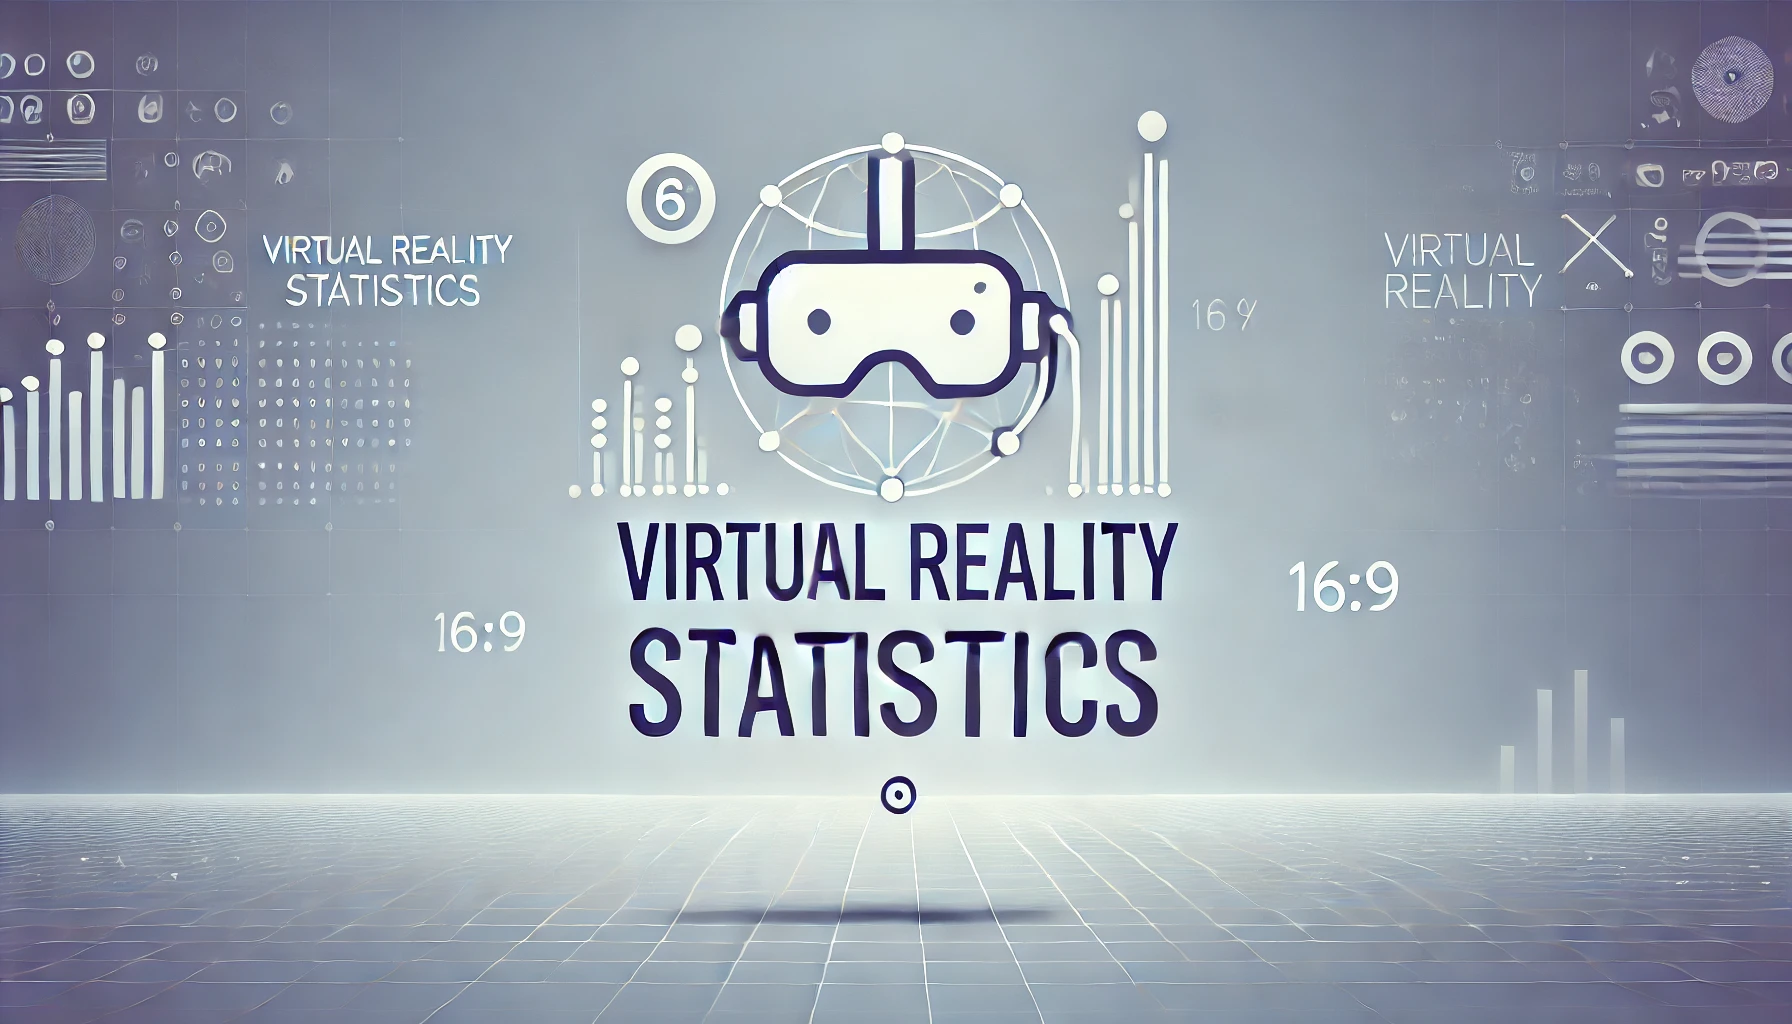 Virtual Reality Statistics By Market Size, Users, Usage, Revenue and Facts